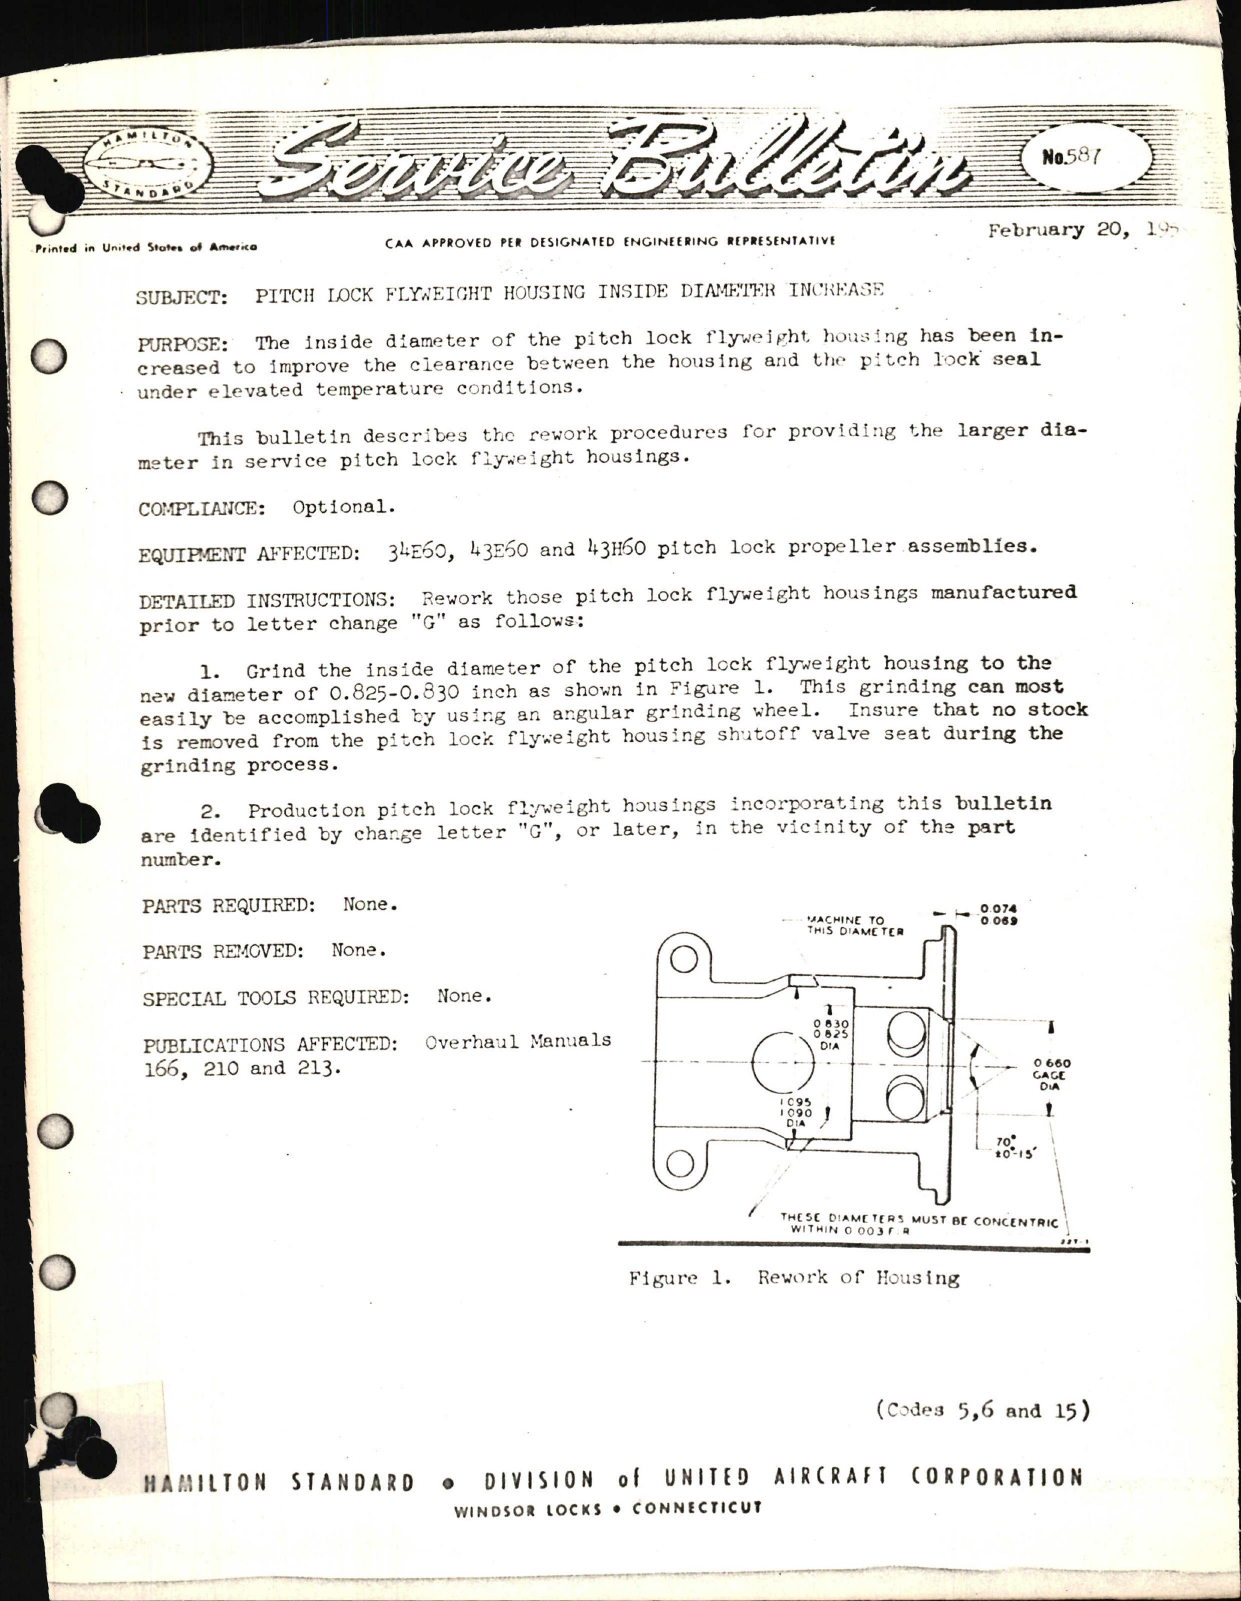 Sample page 1 from AirCorps Library document: Pitch Lock Flyweight Housing Inside Diameter Increase